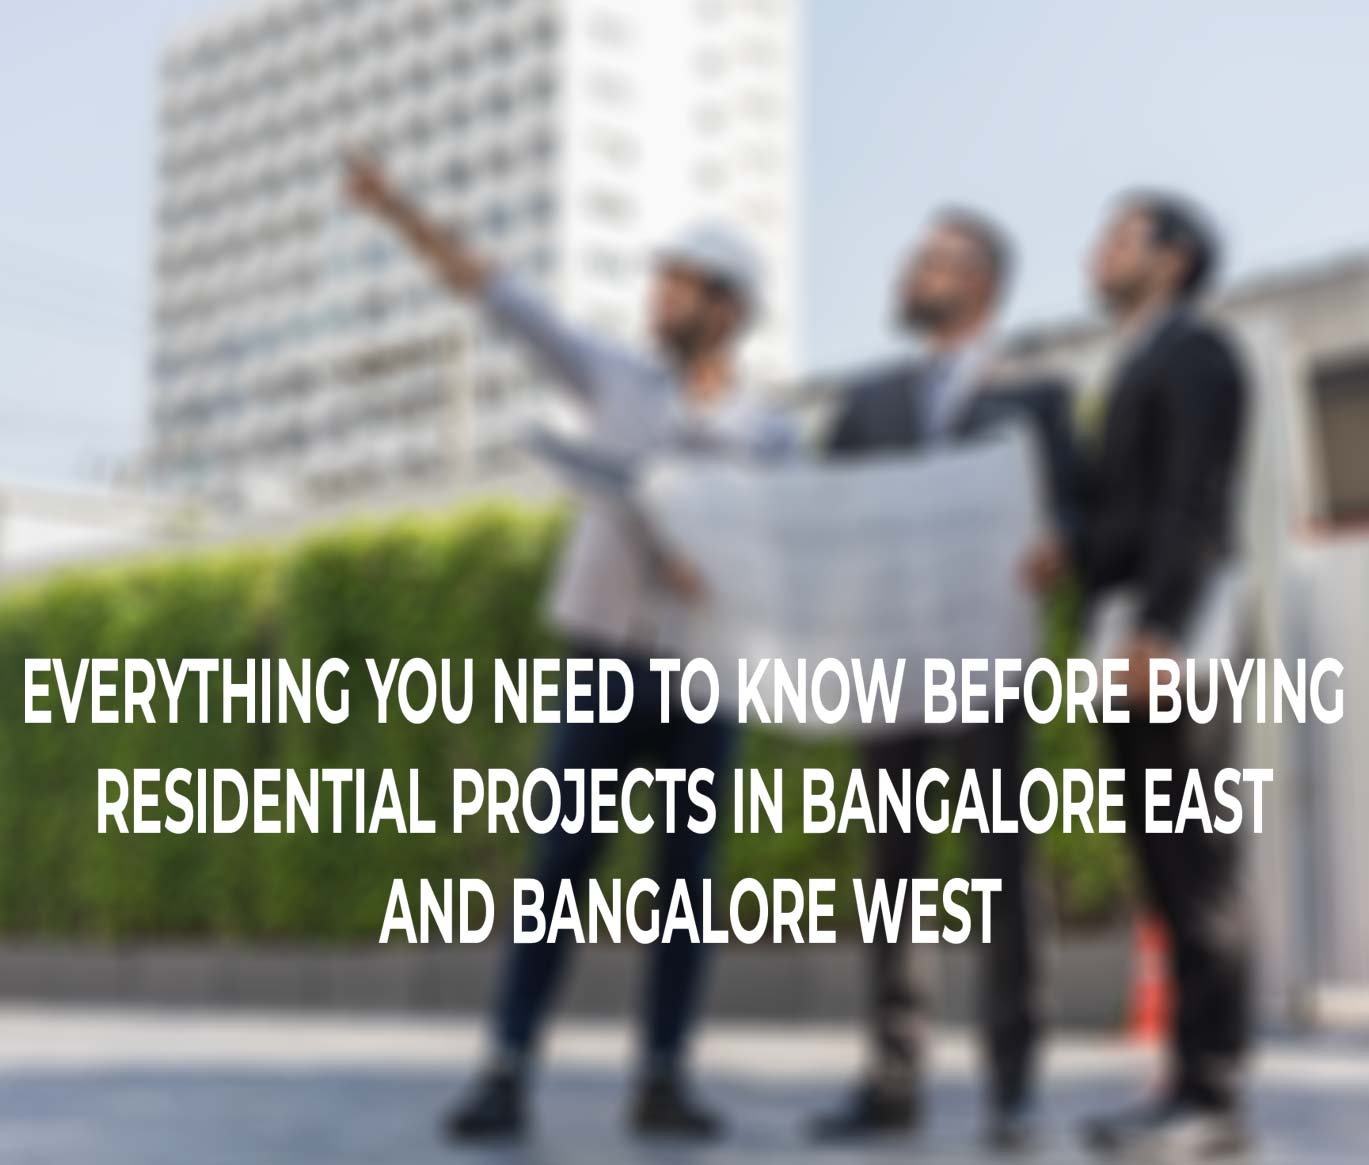 Everything You Need to Know before buying residential projects in Bangalore East and Bangalore West